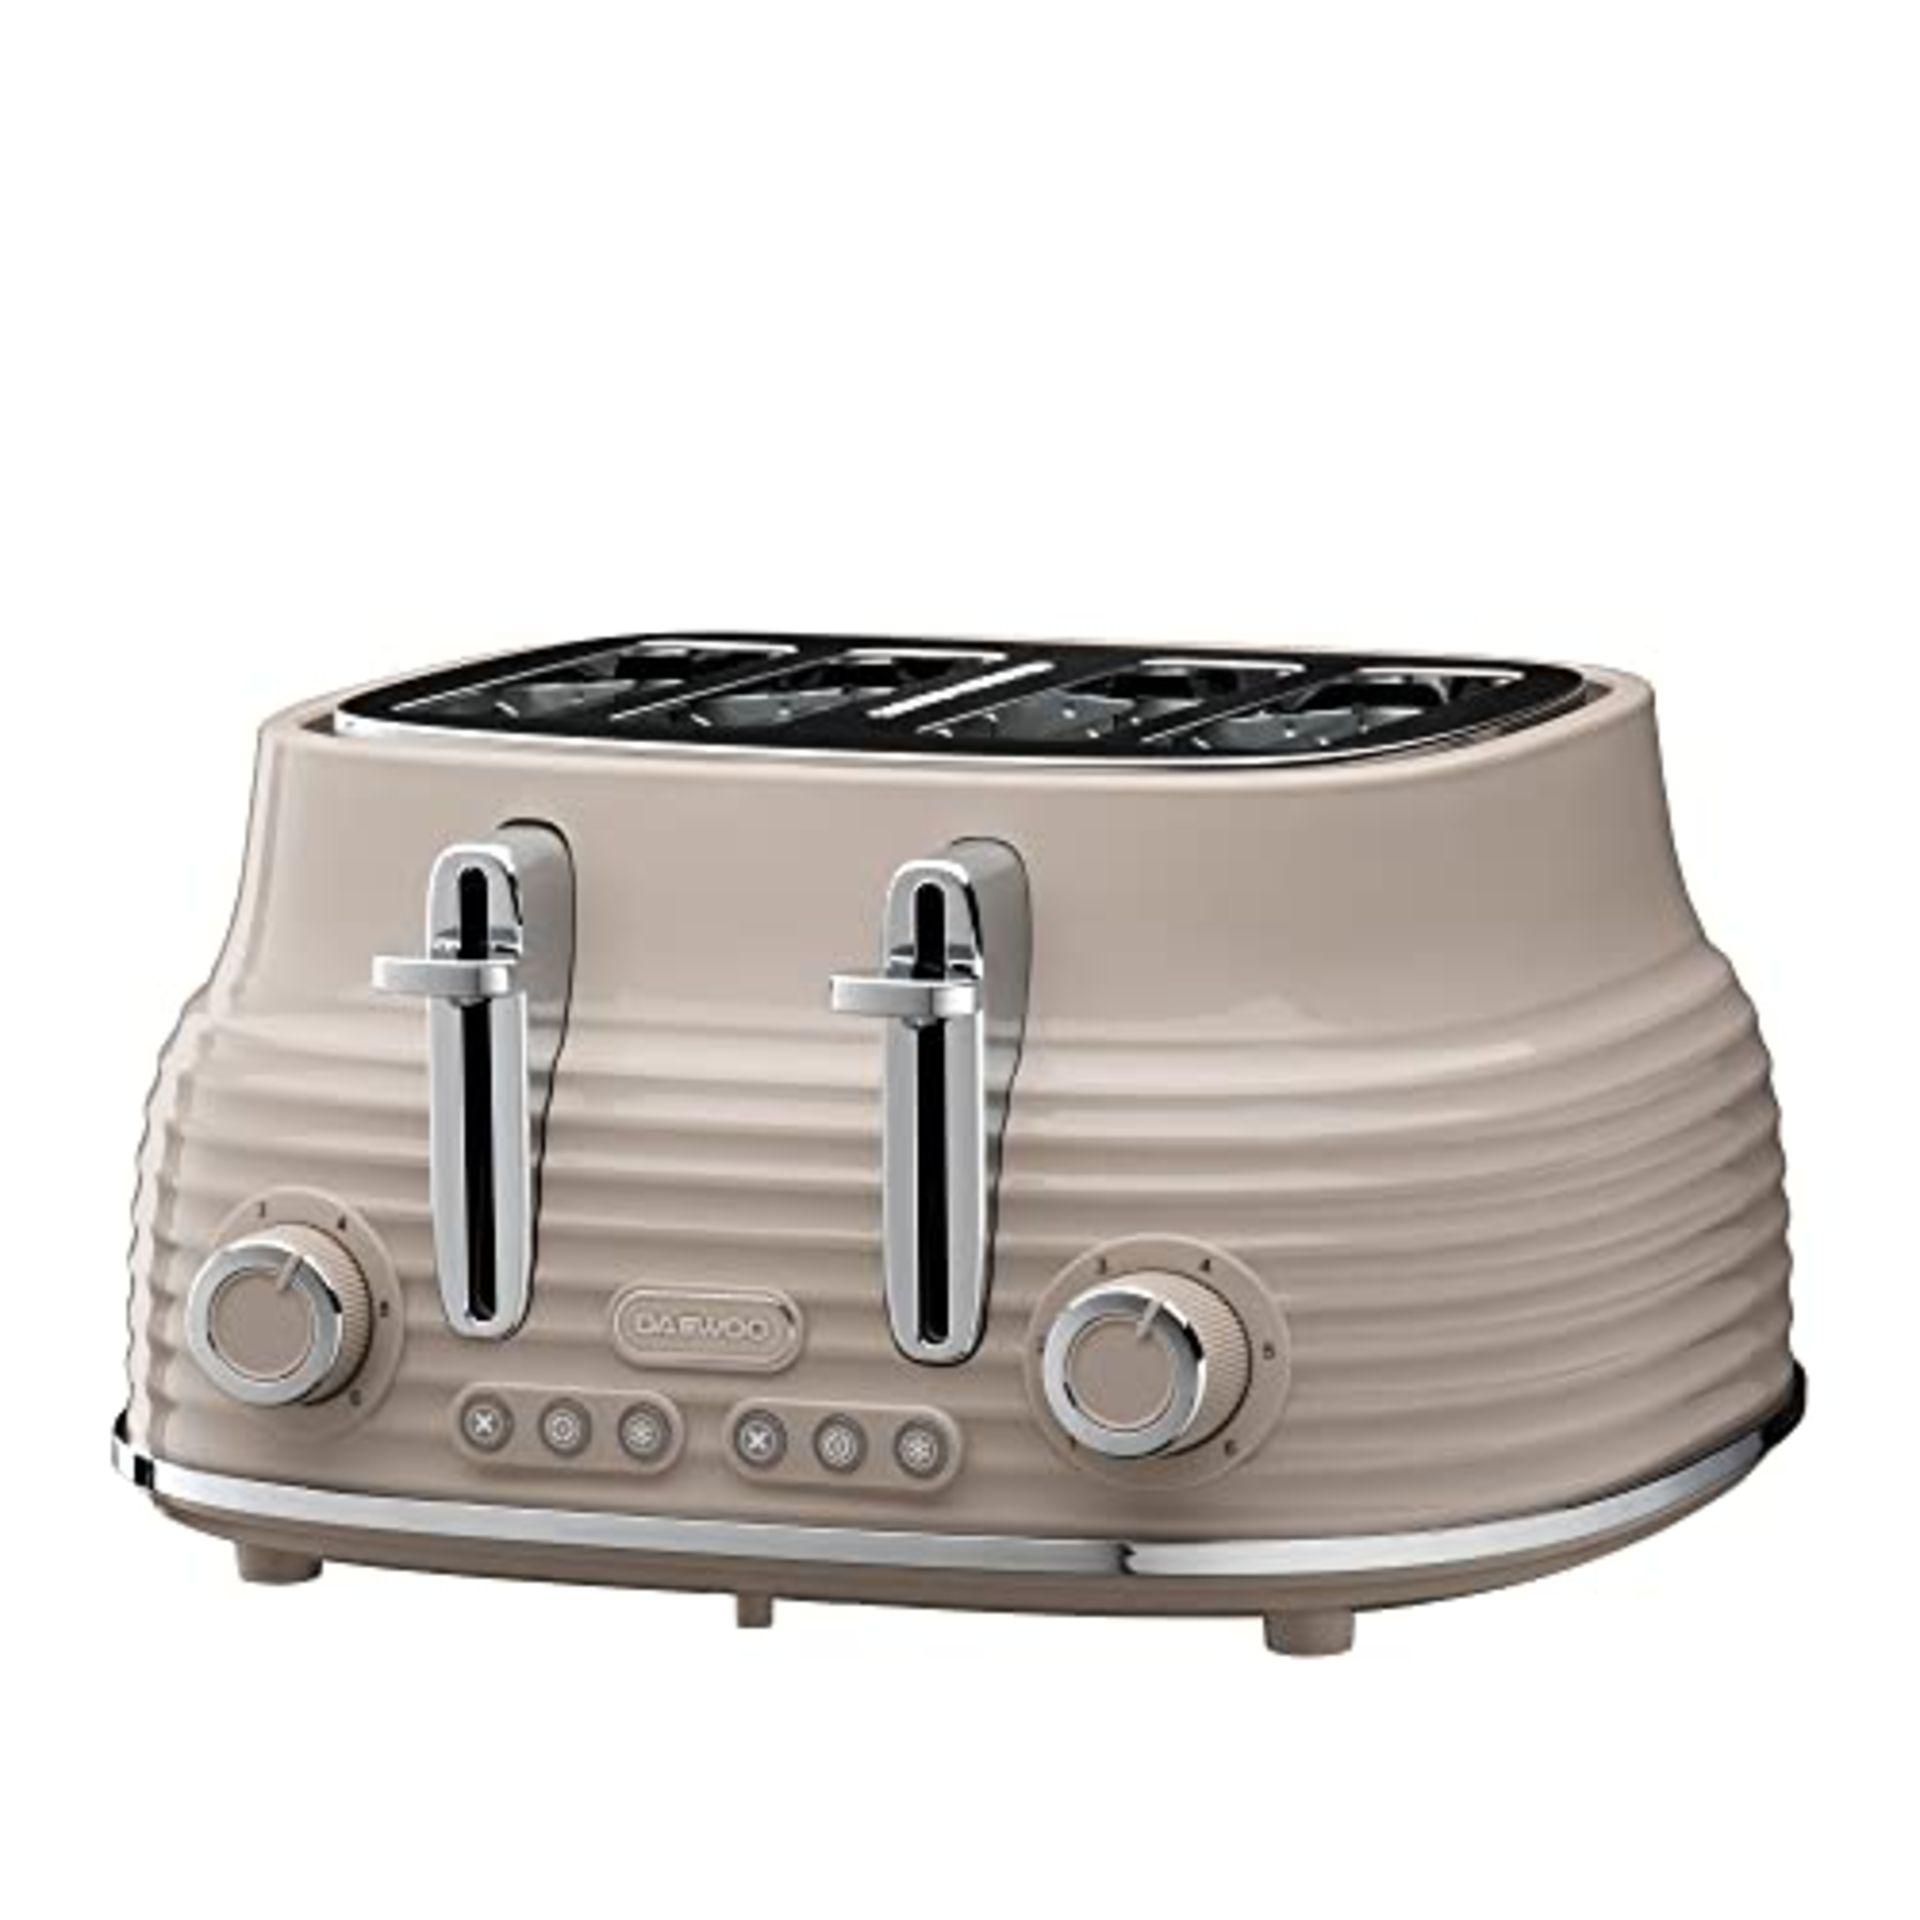 RRP £59.00 Daewoo Sienna Collection 4 Slice Toaster, Adjustable Browning Controls, Cancel, Defros